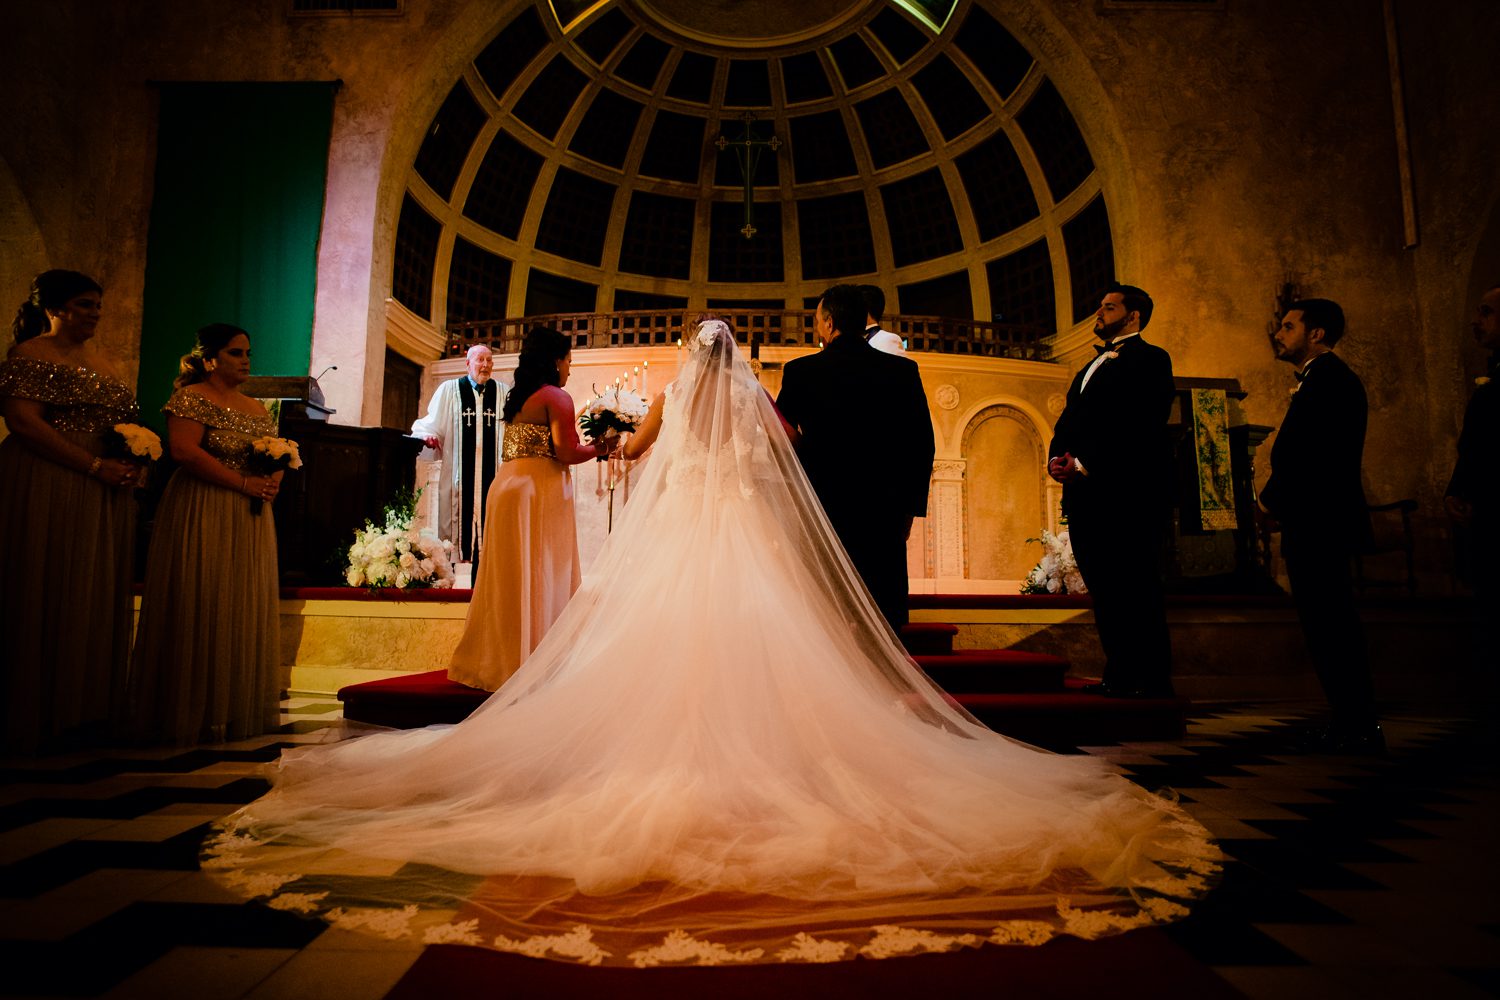 A church wedding ceremony in Miami Beach photographed by a Coral Gables wedding photographer.